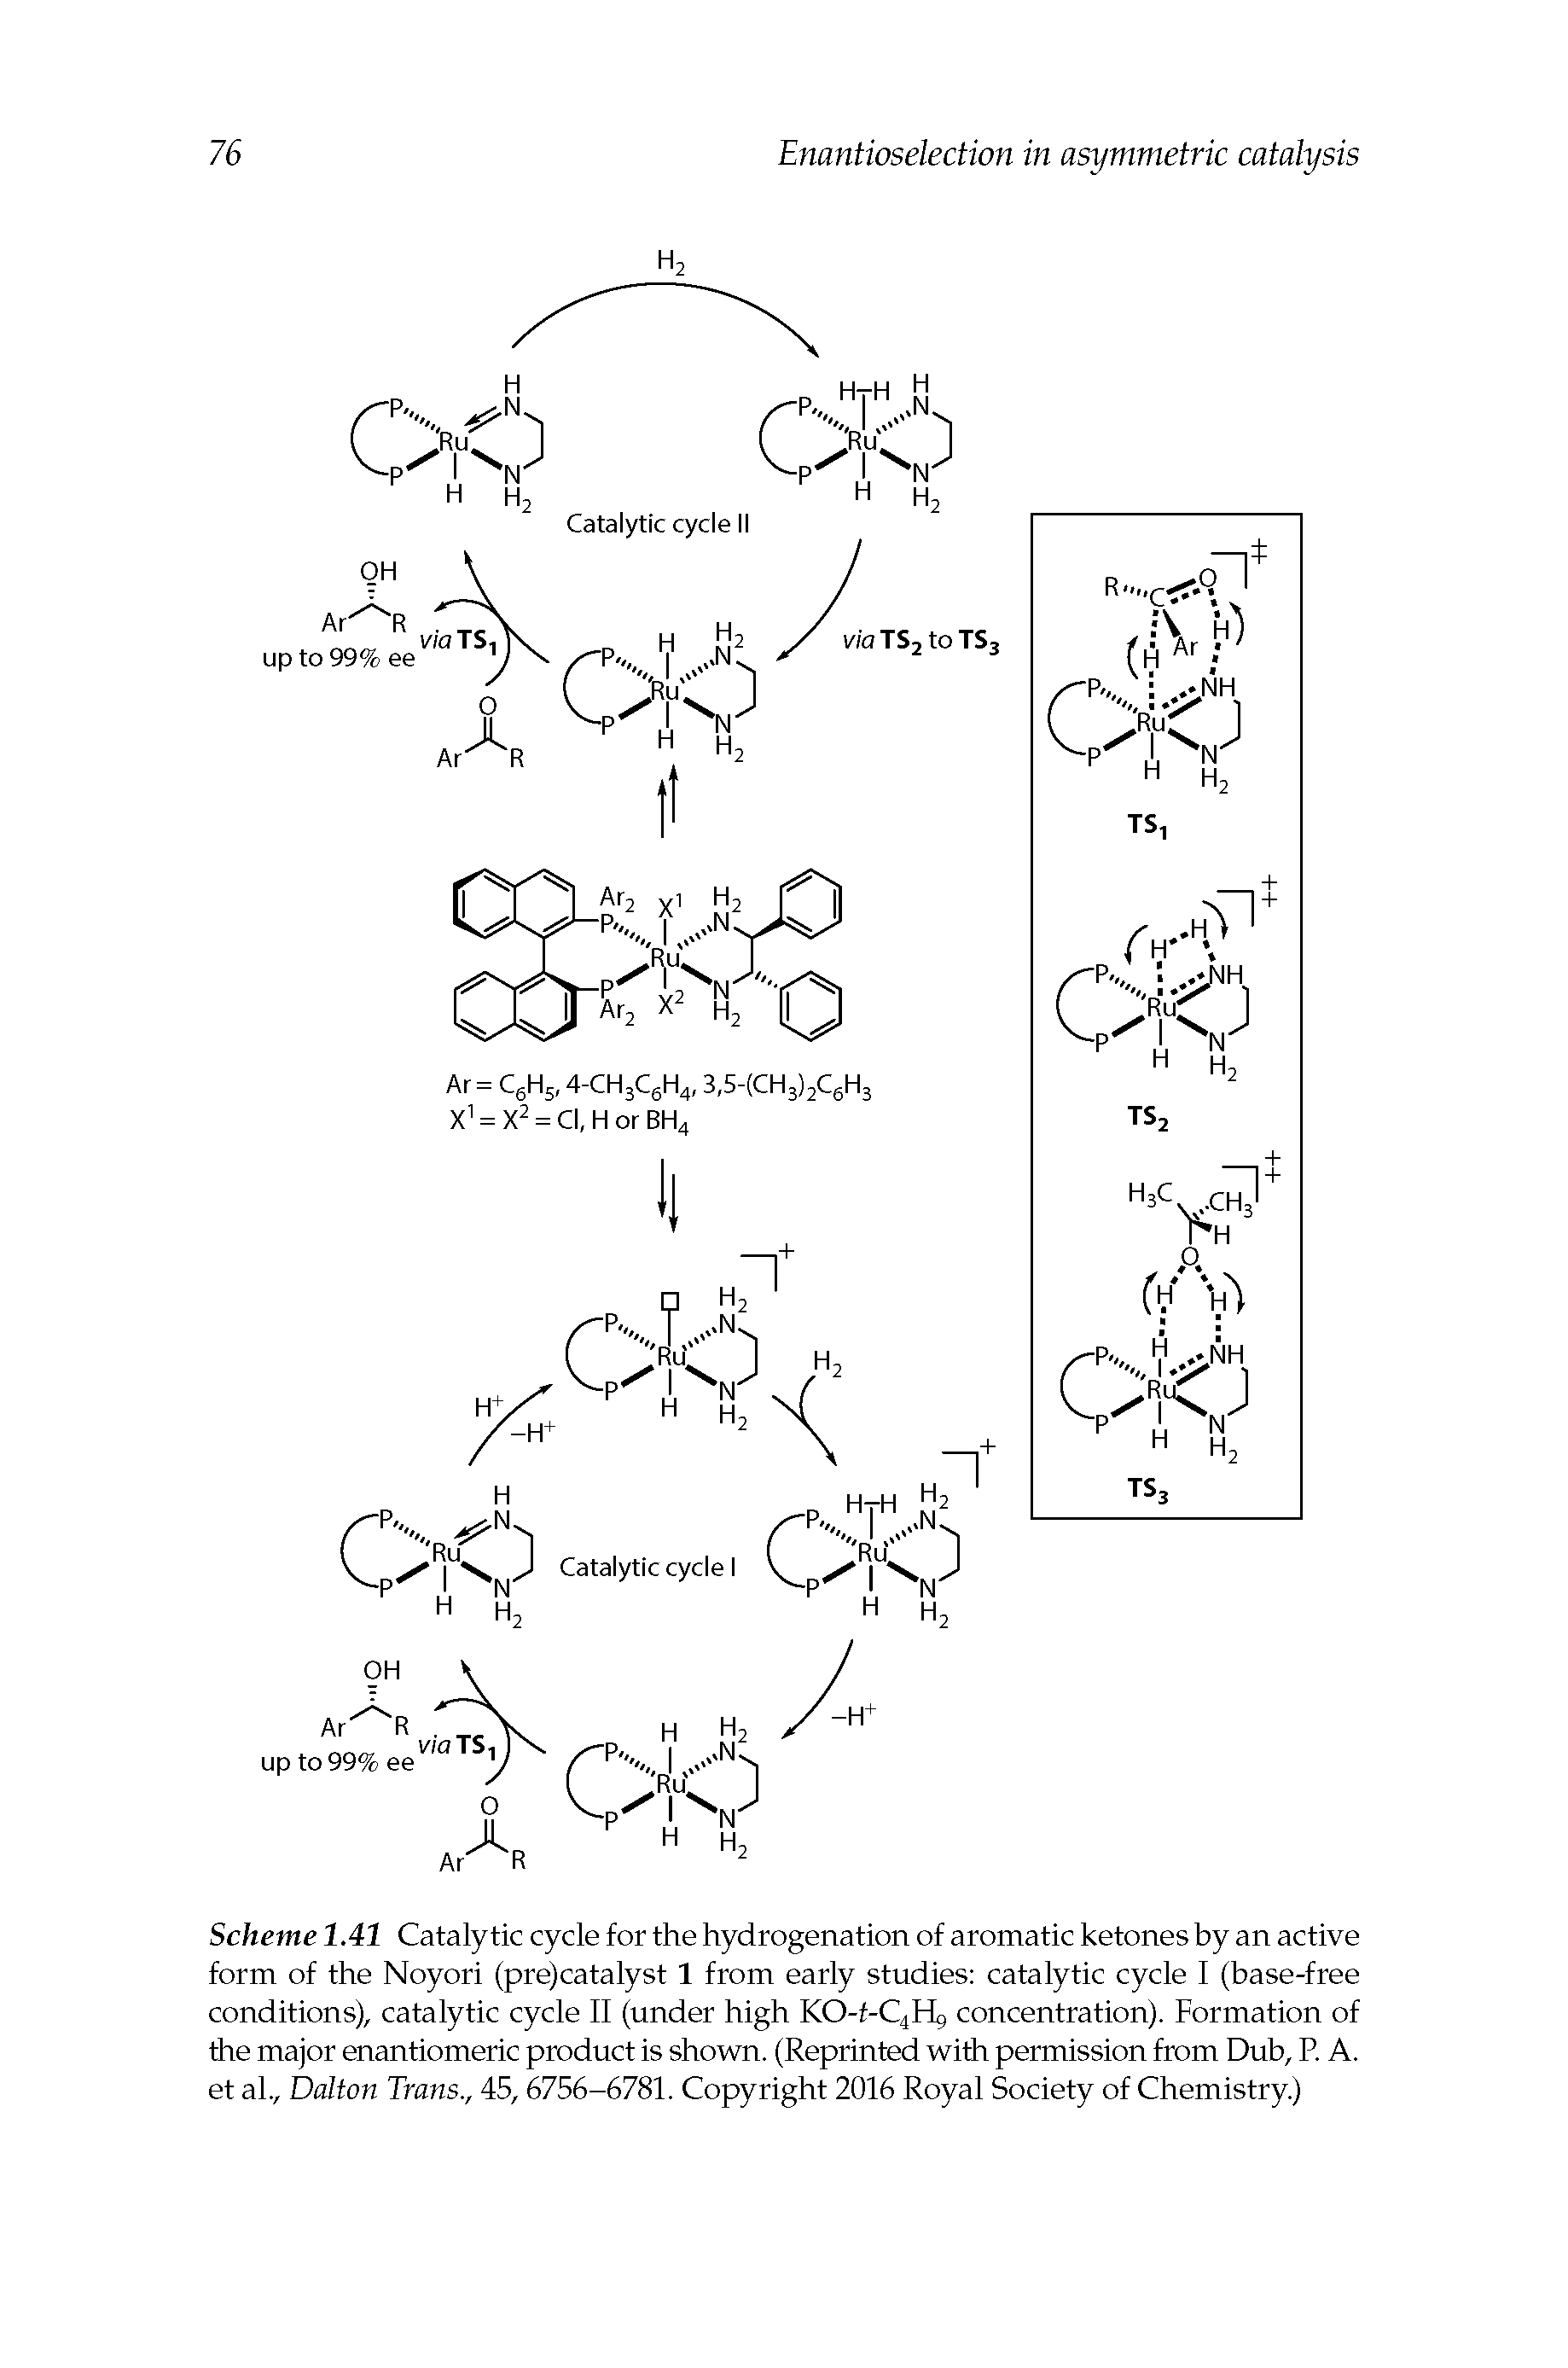 Scheme 1.41 Catalytic cycle for the hydrogenation of aromatic ketones by an active form of the Noyori (pre)catalyst 1 from early studies catalytic cycle 1 (base-free conditions), catalytic cycle 11 (under high KO-t-C4H5 concentration). Formation of the major enantiomeric product is shown. (Reprinted with permission from Dub, R A. et al., Dalton Trans., 45, 6756-6781. Copyright 2016 Royal Society of Chemistry.)...